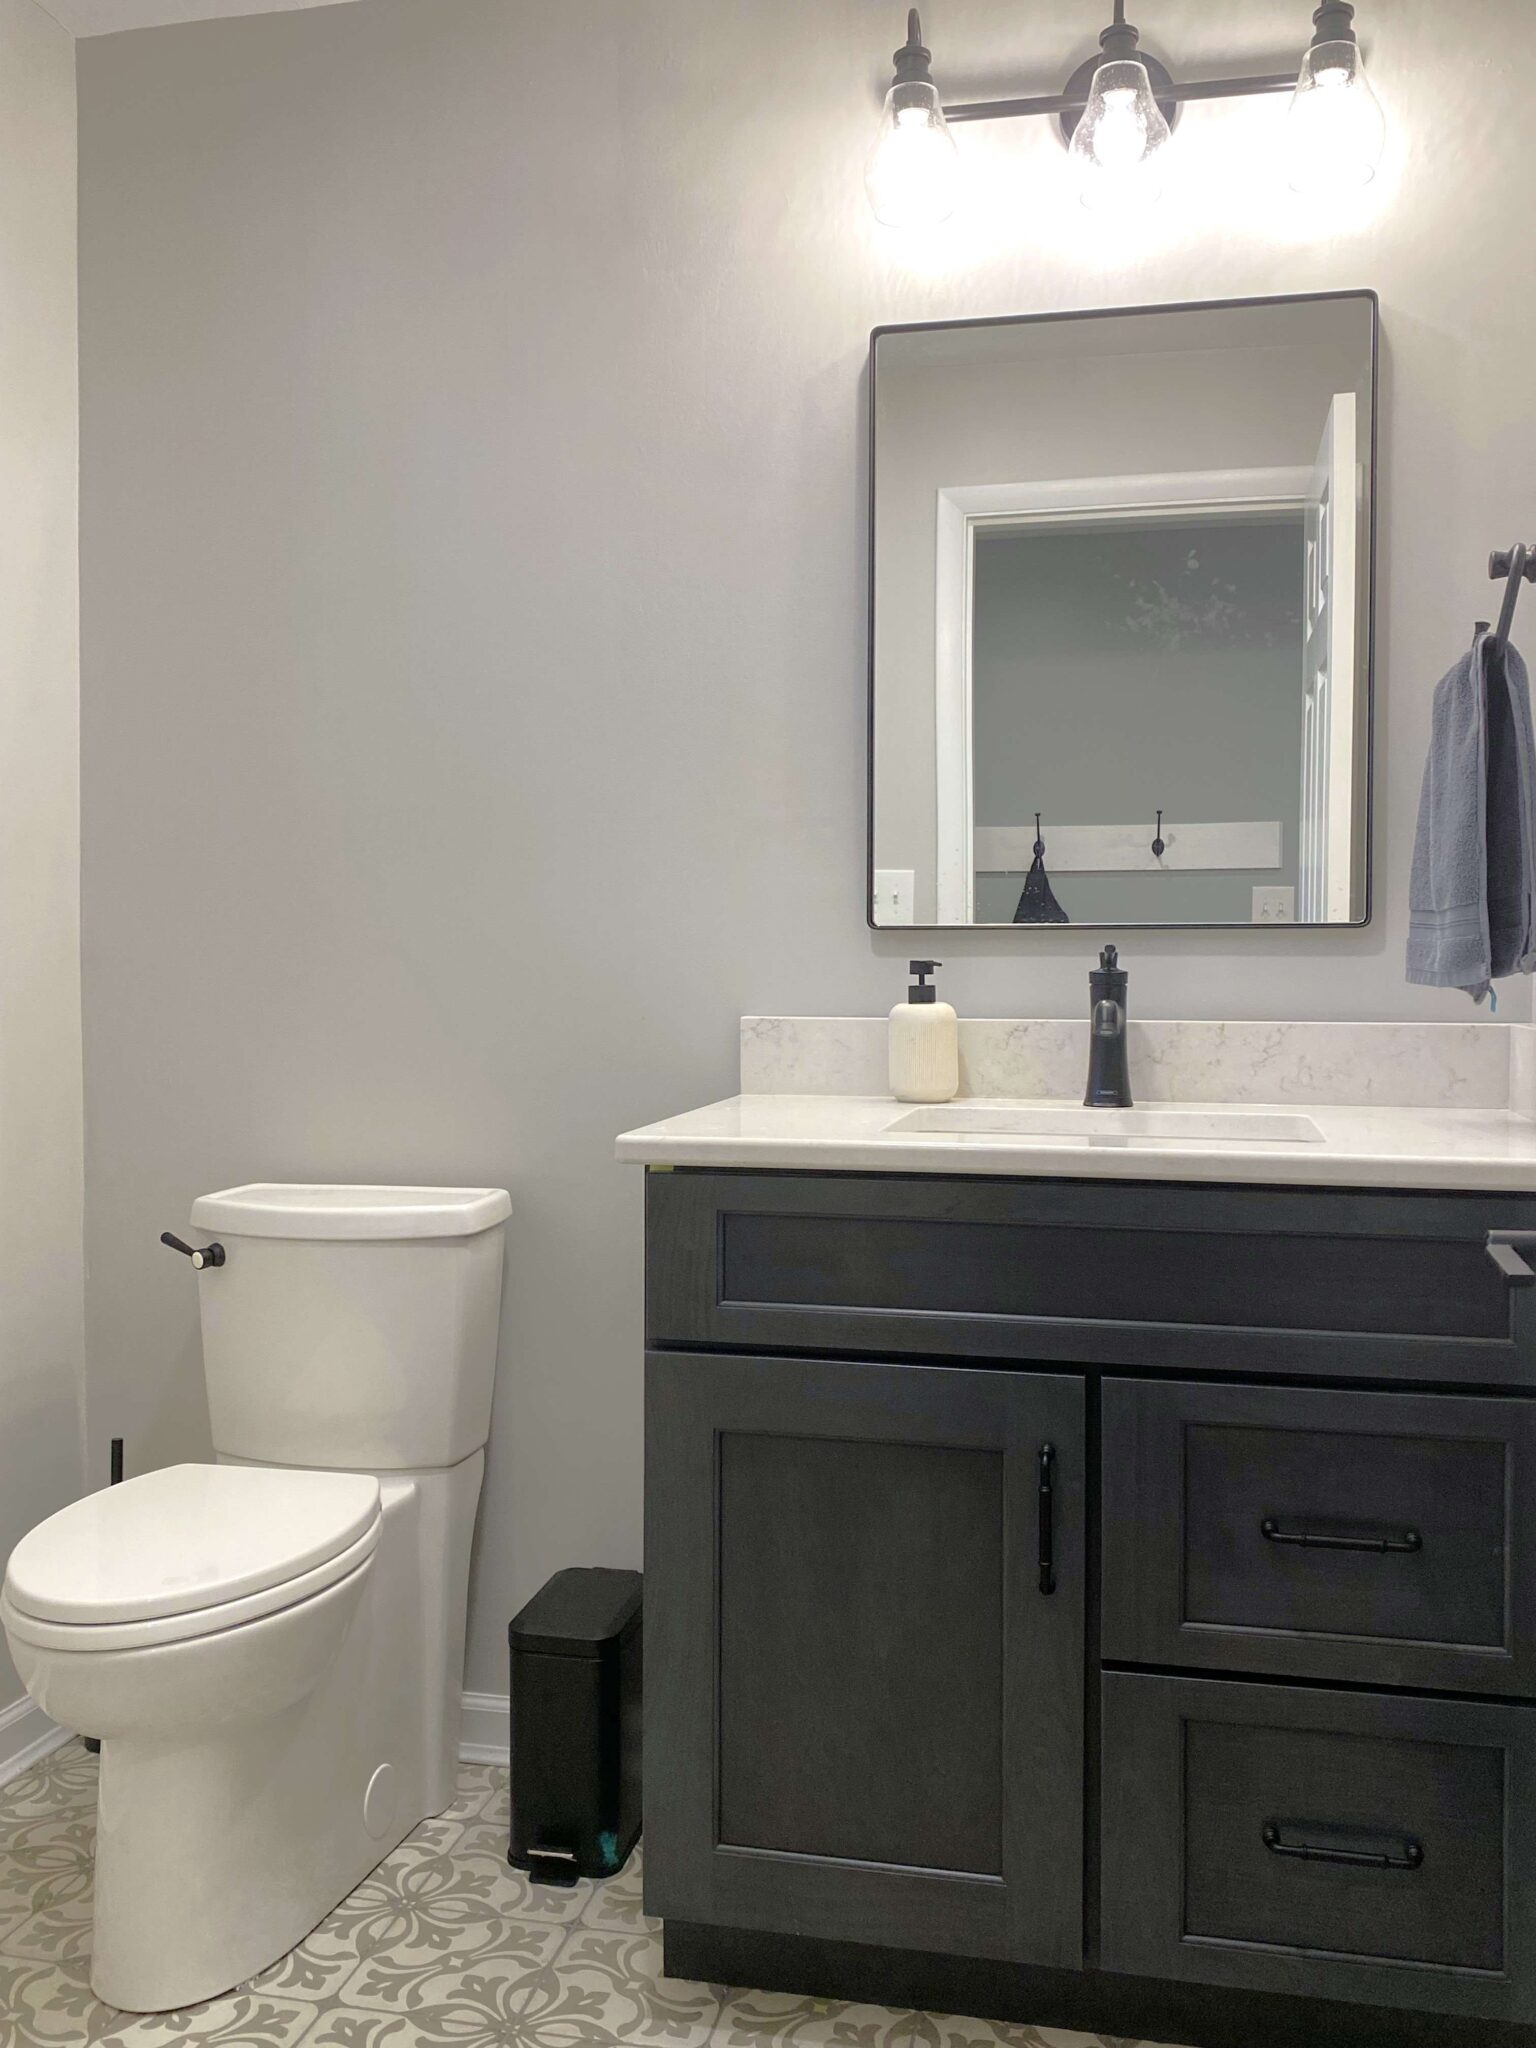 Cincinnati OH family home remodeling - Powder room after